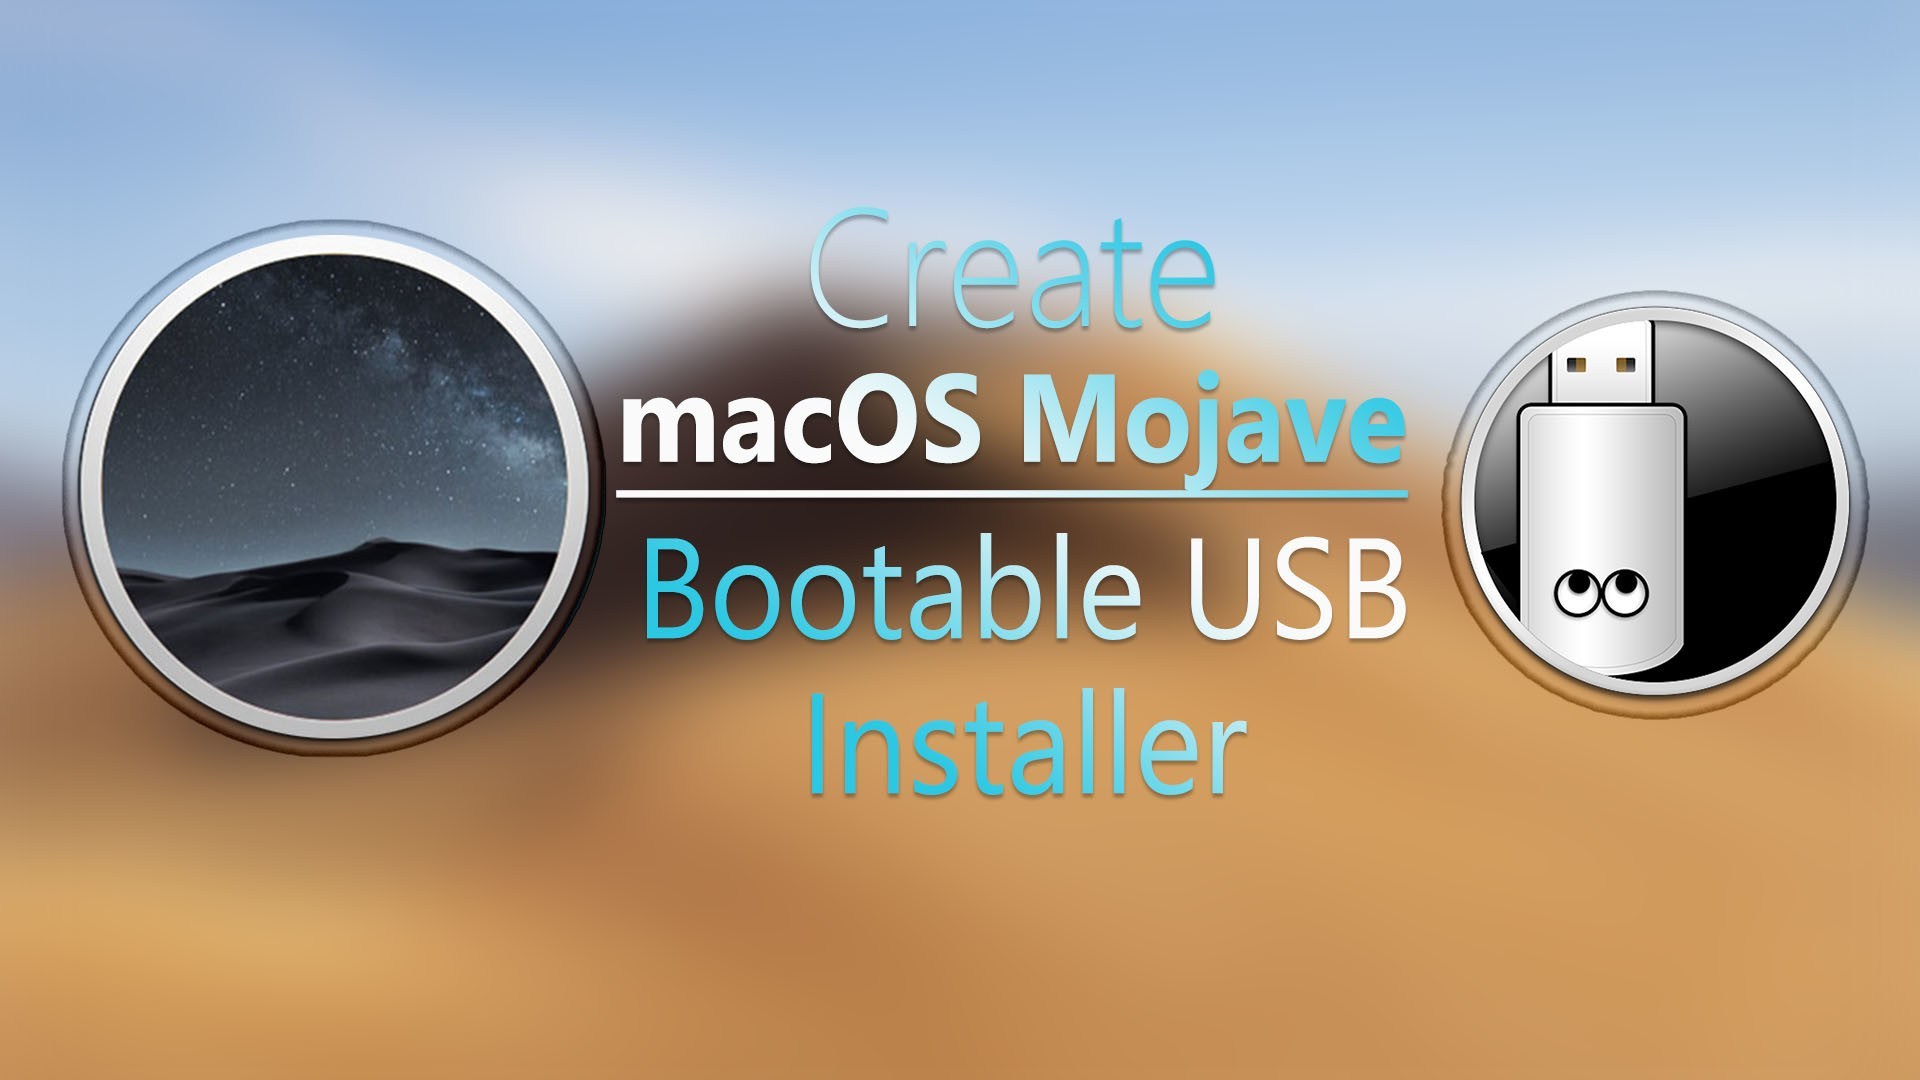 Create Bootable Installer For Macos Mojave 10.14.6